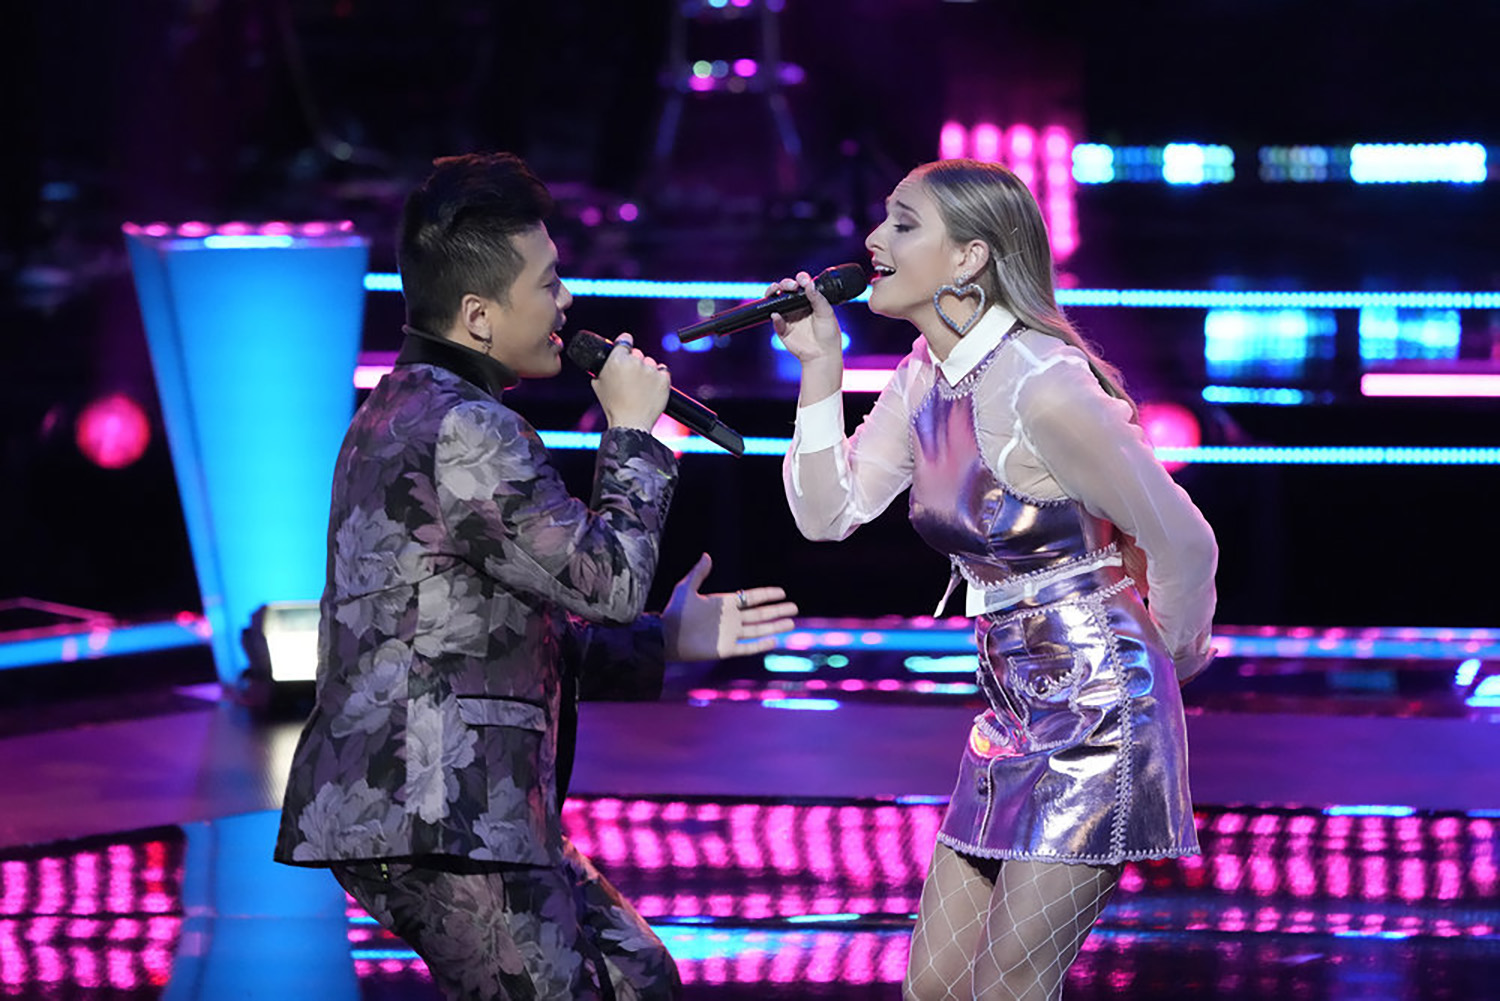 Vaughn Mugol and Katherine Anne Mohler perform during The Voice Season 21 Episode 8.